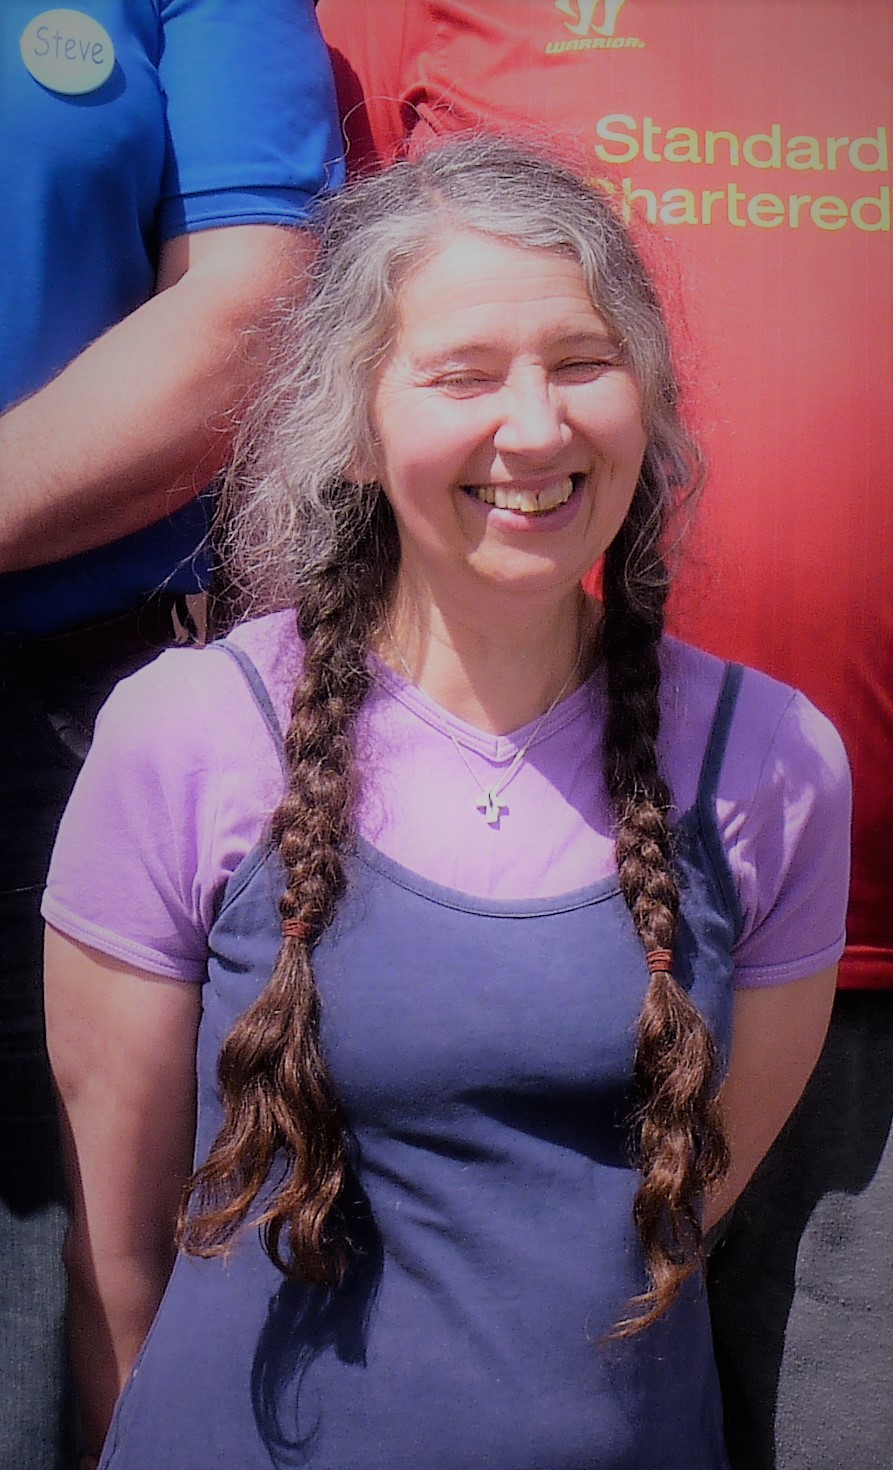 A picture of Clare, who is wearing a blue dress over a purple t-shirt, and is standing in a group of people